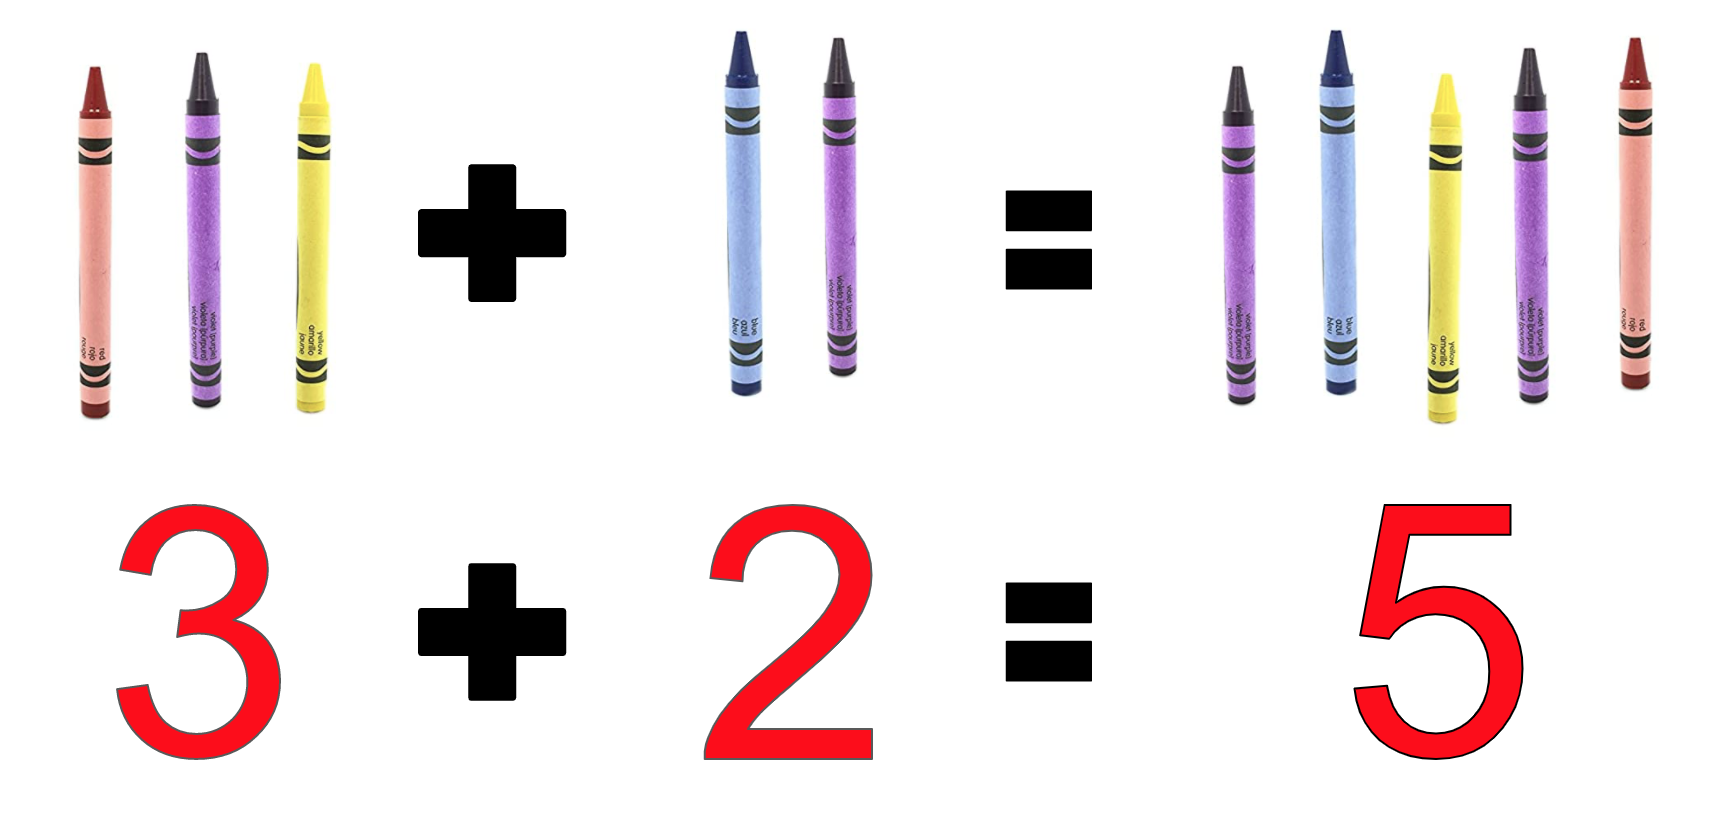 Solving an addition problem with crayons